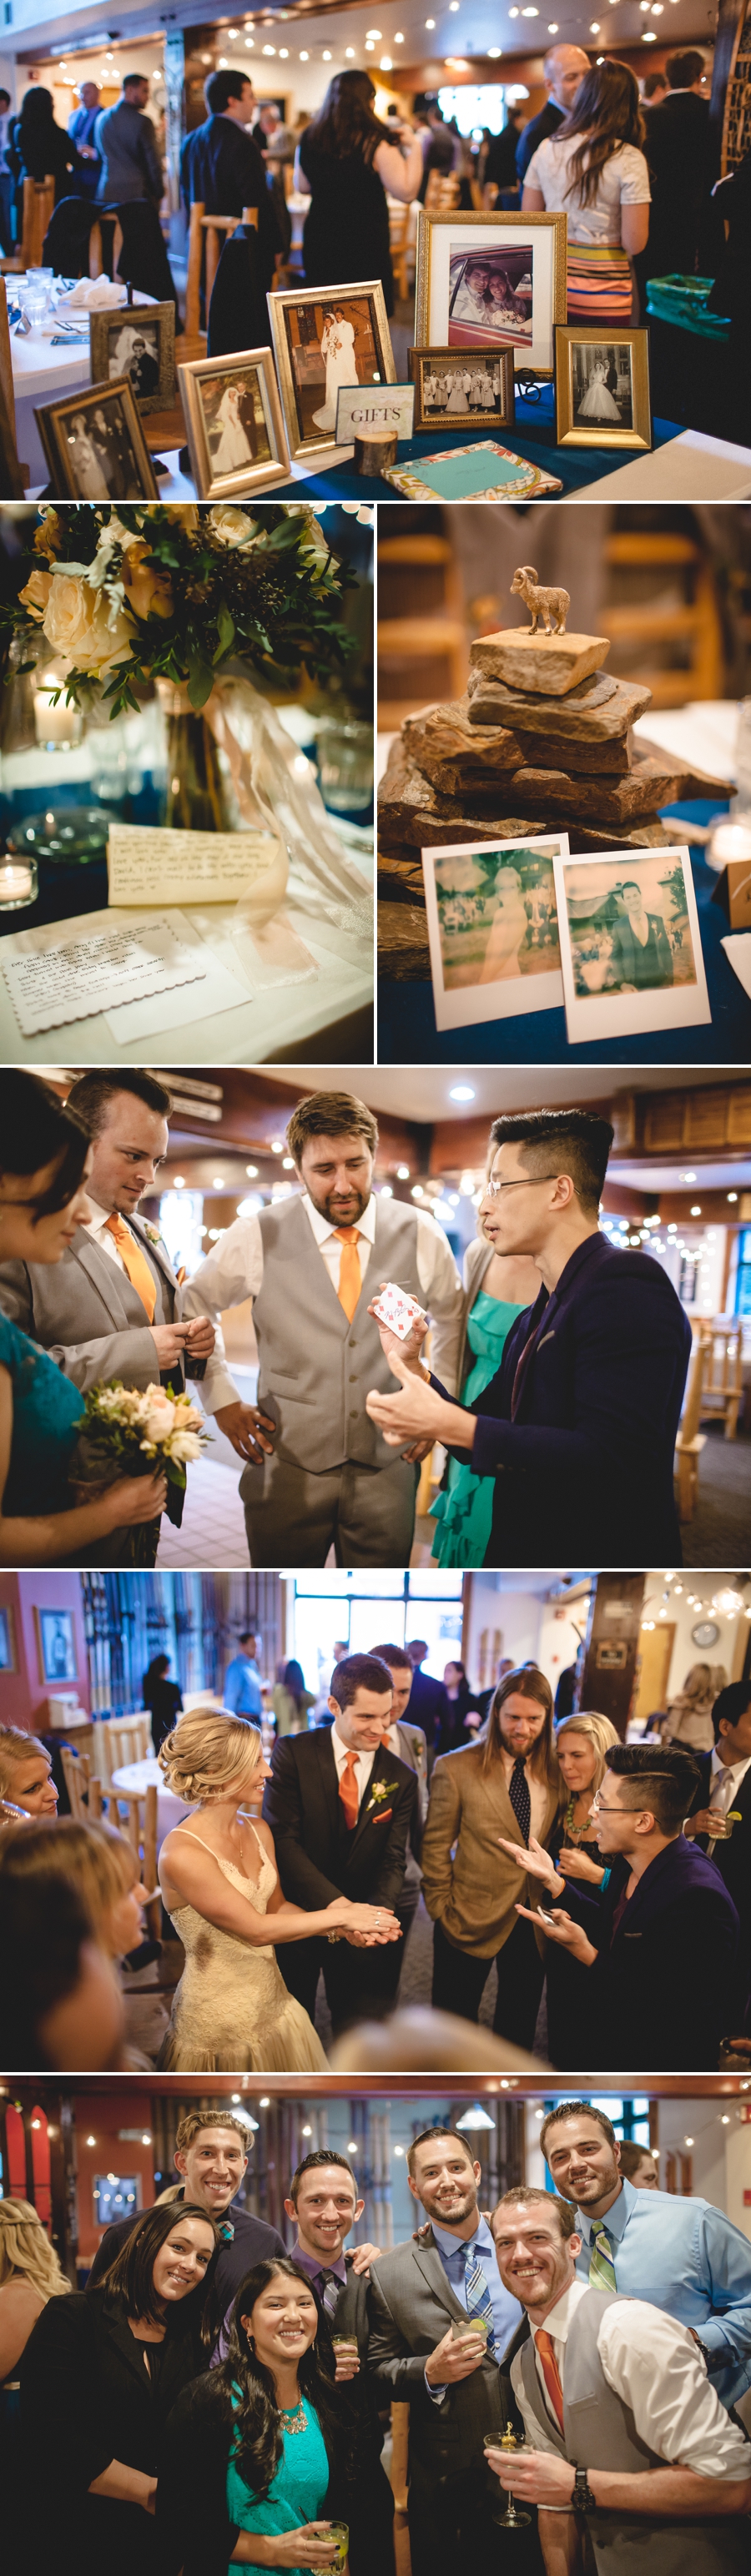 Pacific Northwest Fall Wedding at Crystal Mountain - Photography by Lucas Mobley